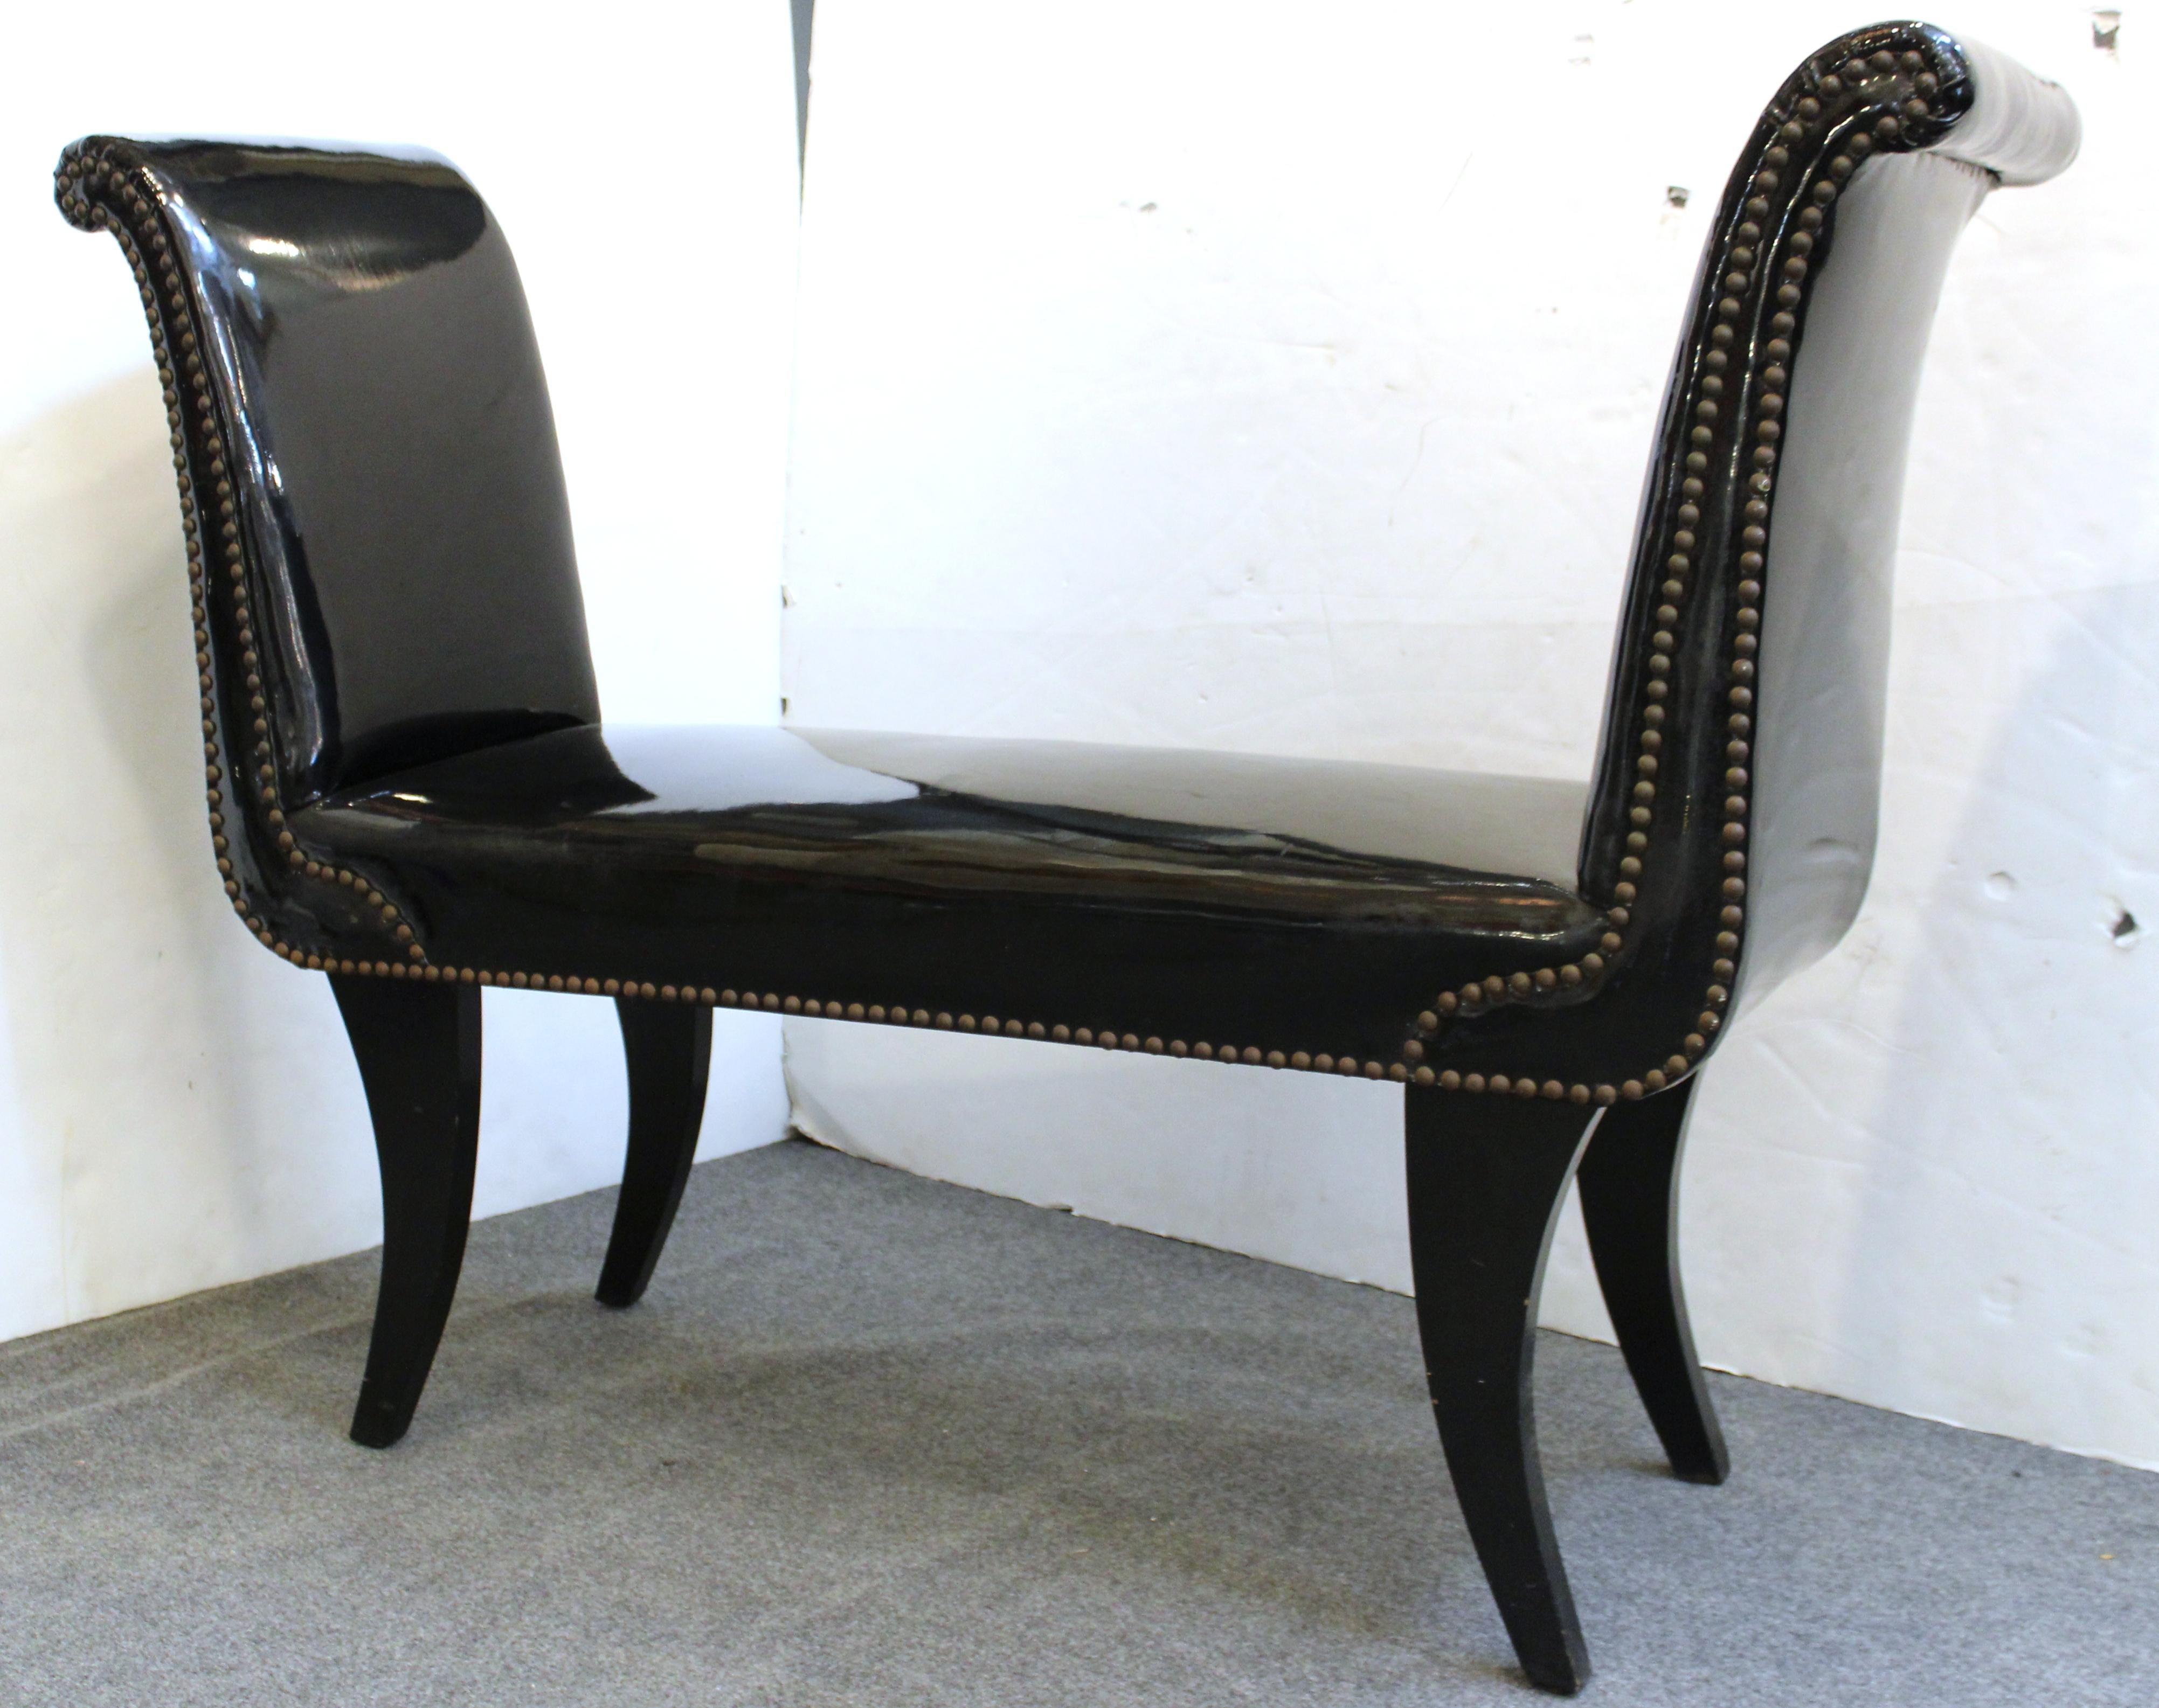 Modern bench with classical lines, upholstered in black faux leather and with ebonized legs. The piece is in good vintage condition, with some minor wear to the upholstered surfaces.